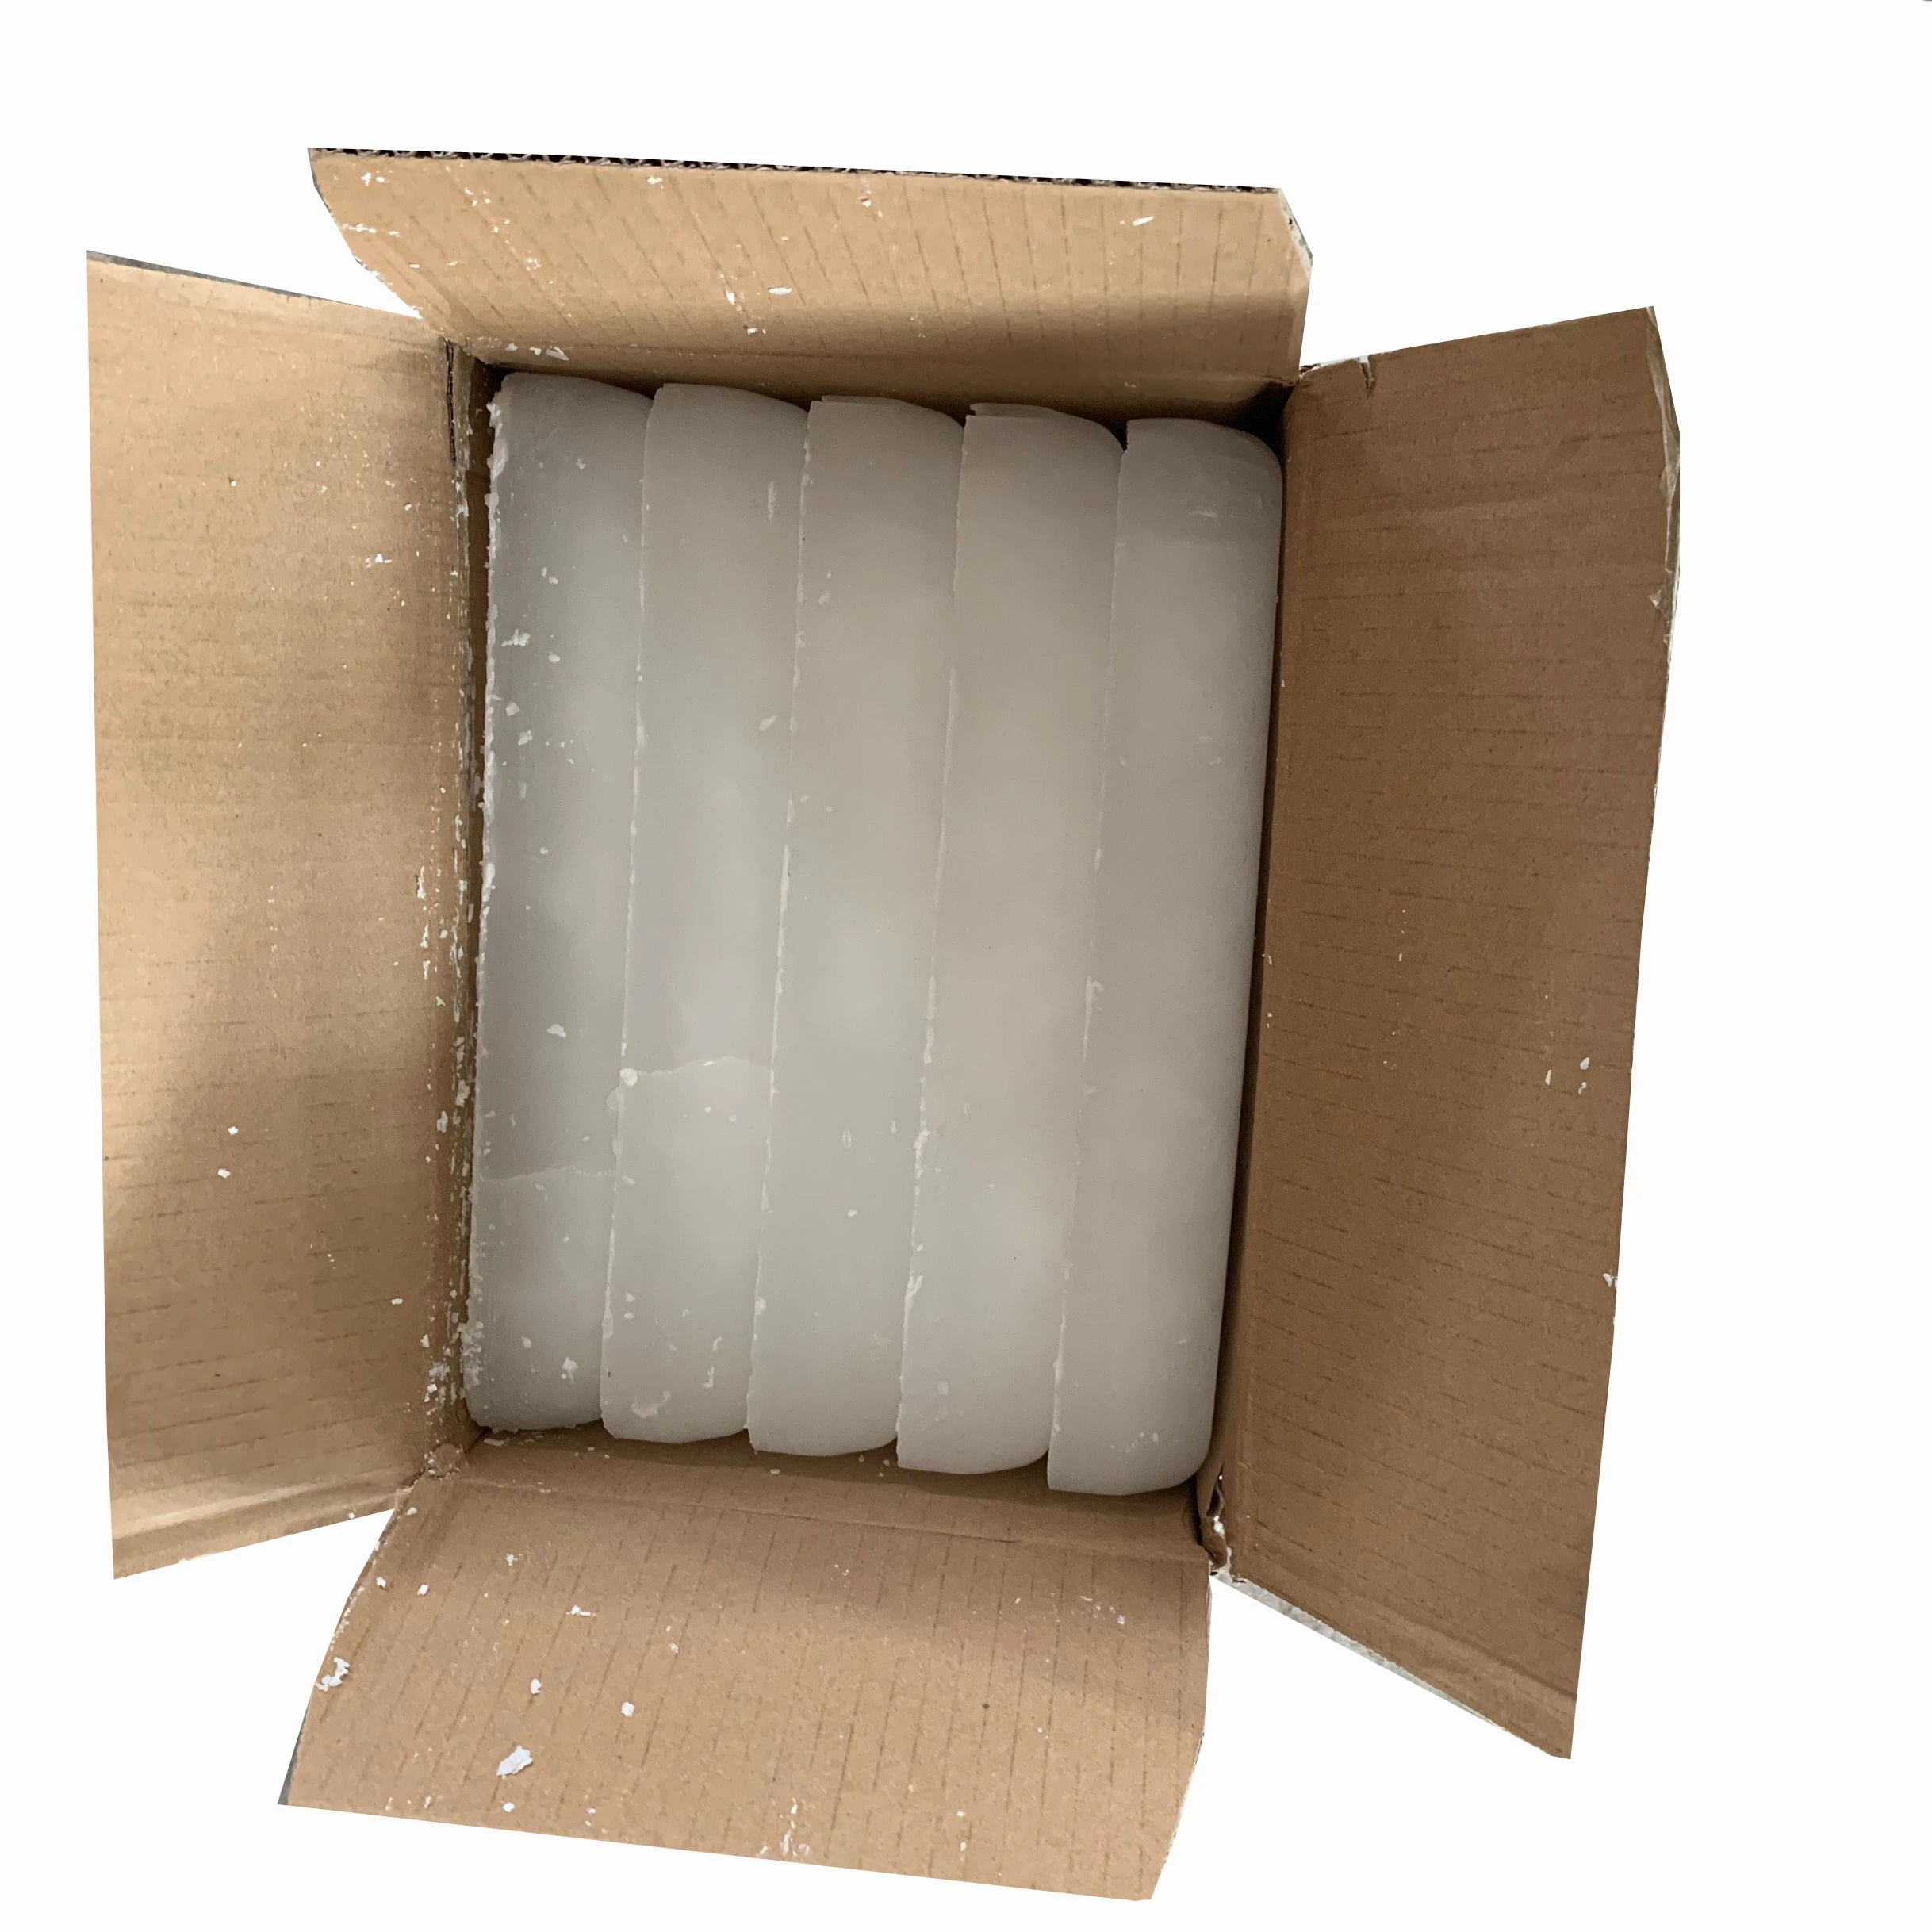 Cosmetic grade high quality 58-60 fully refined white paraffin wax for sale in box package